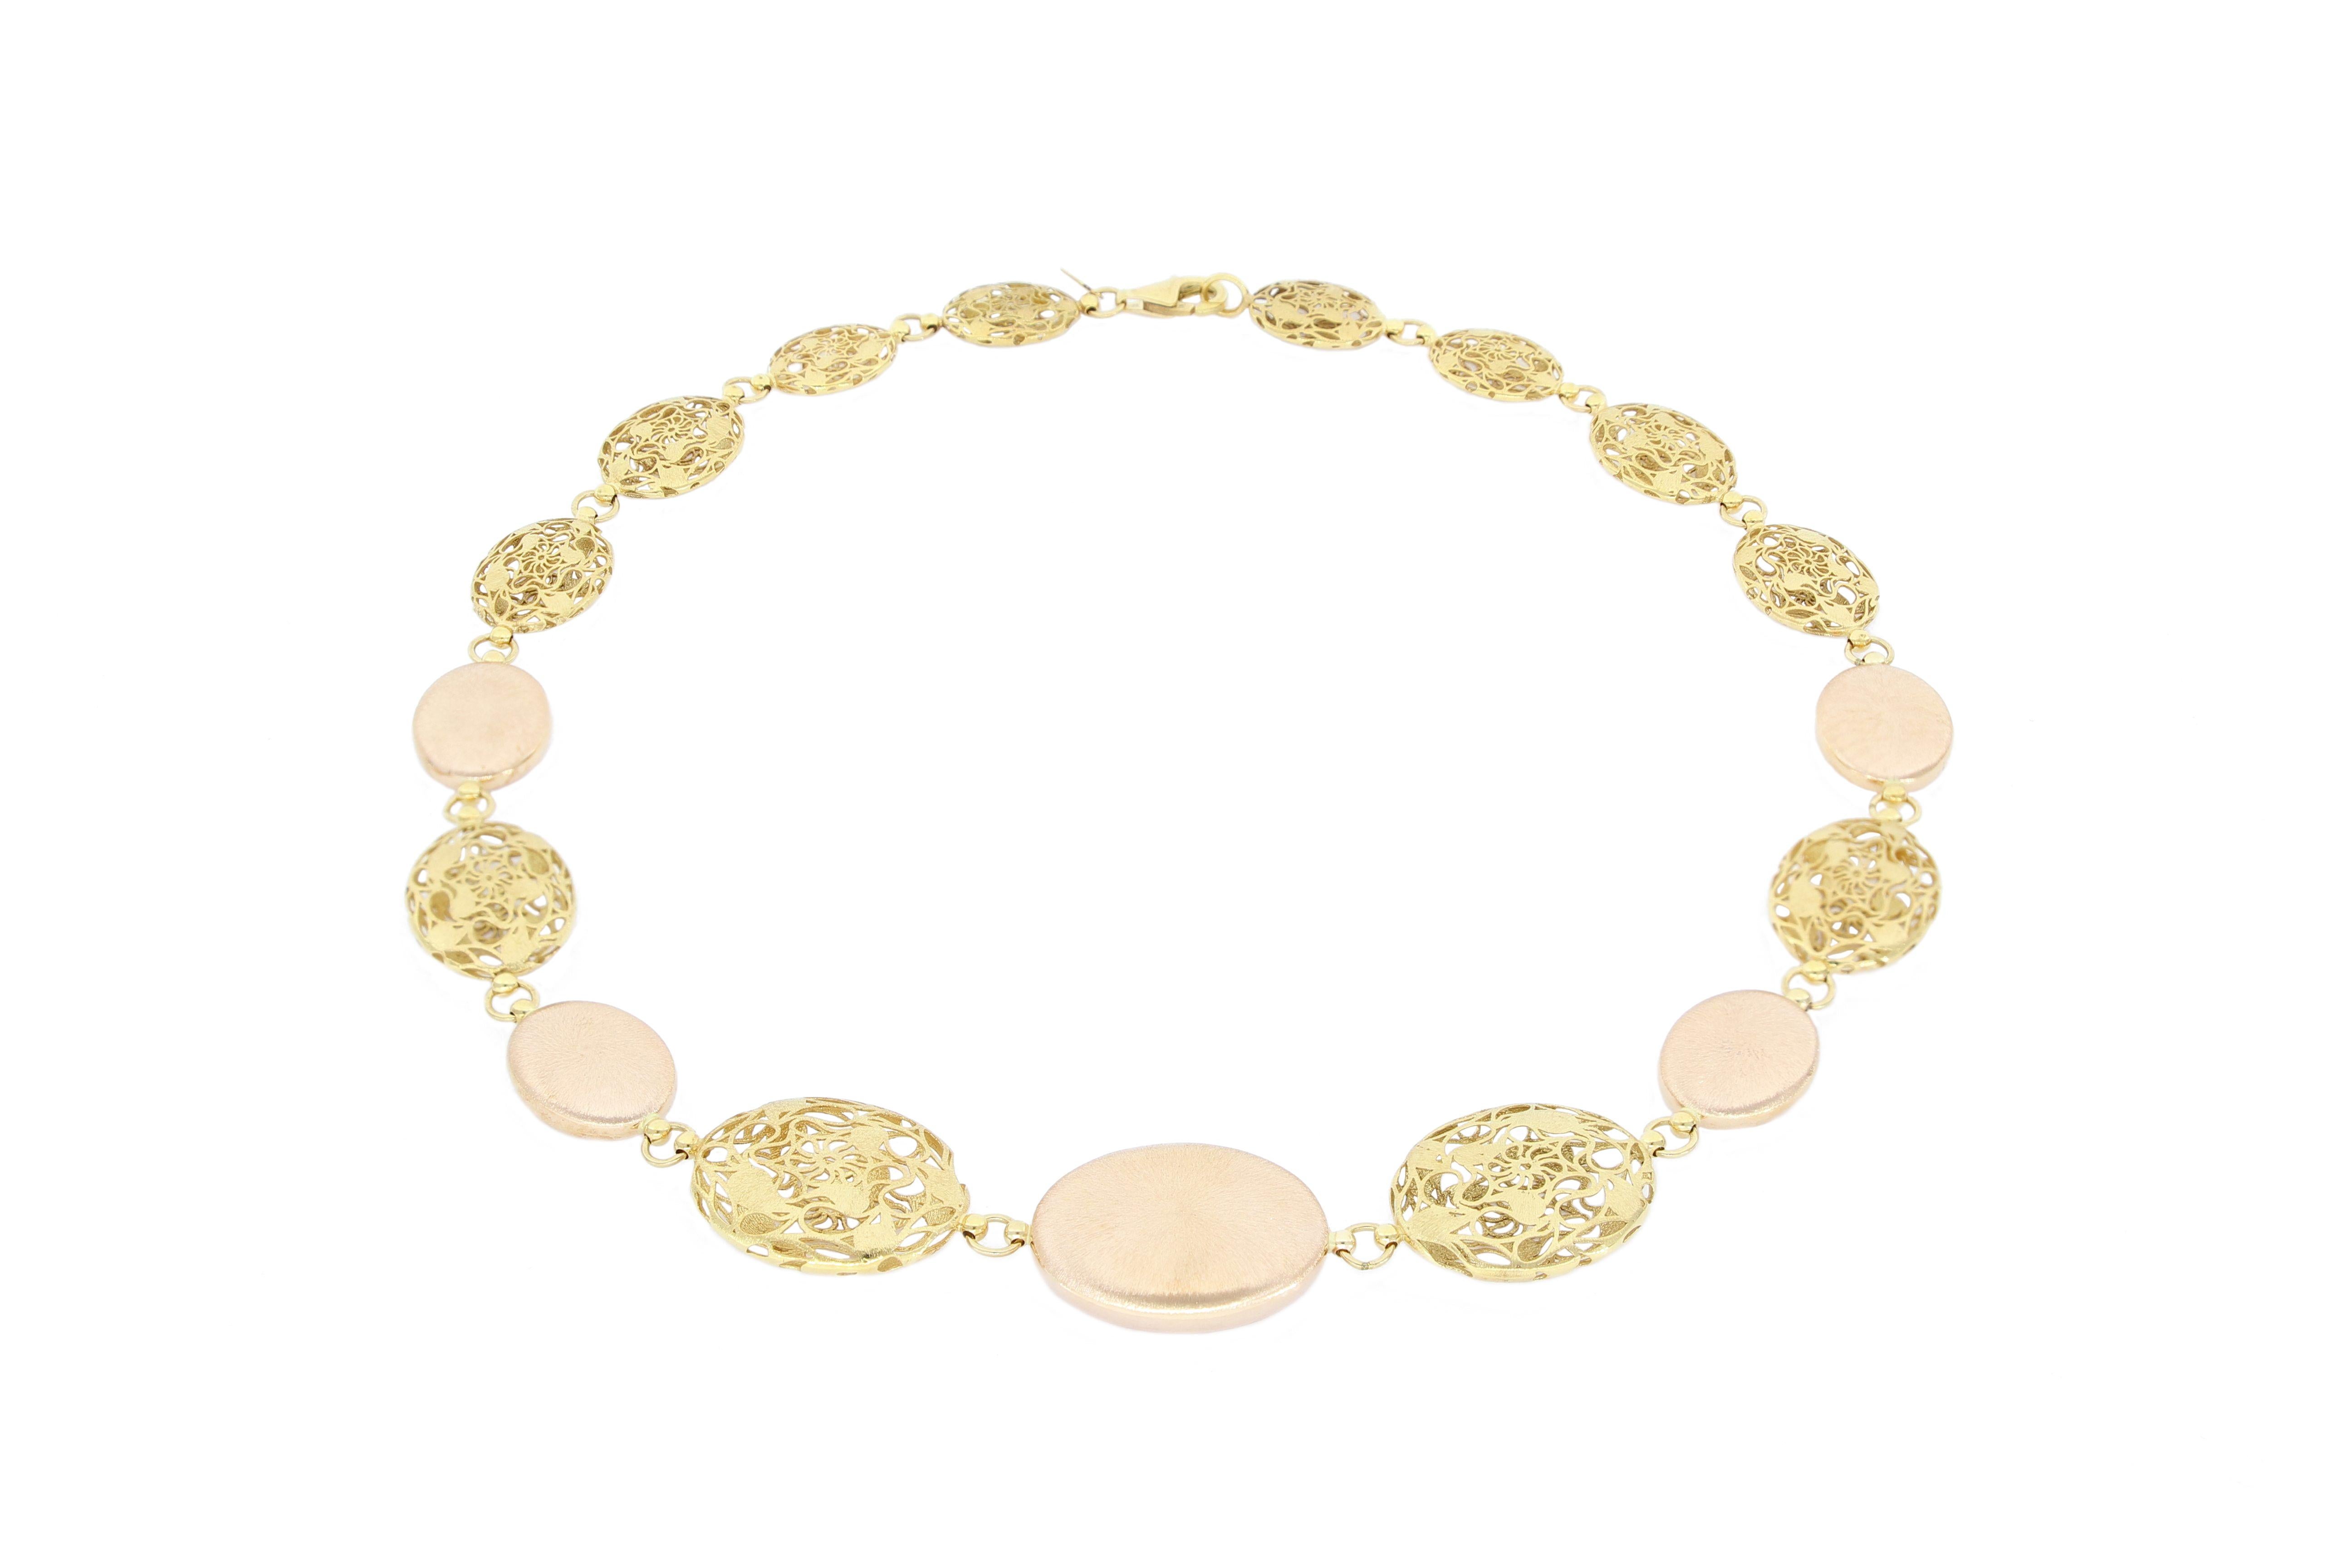 This fabulous 18K Gold Necklace is designed and made in Italy, this special piece of jewellery is composed of yellow gold and brushed rose gold, with superb craftsmanship, perfect accessory for modern and sophisticated women.

The company is